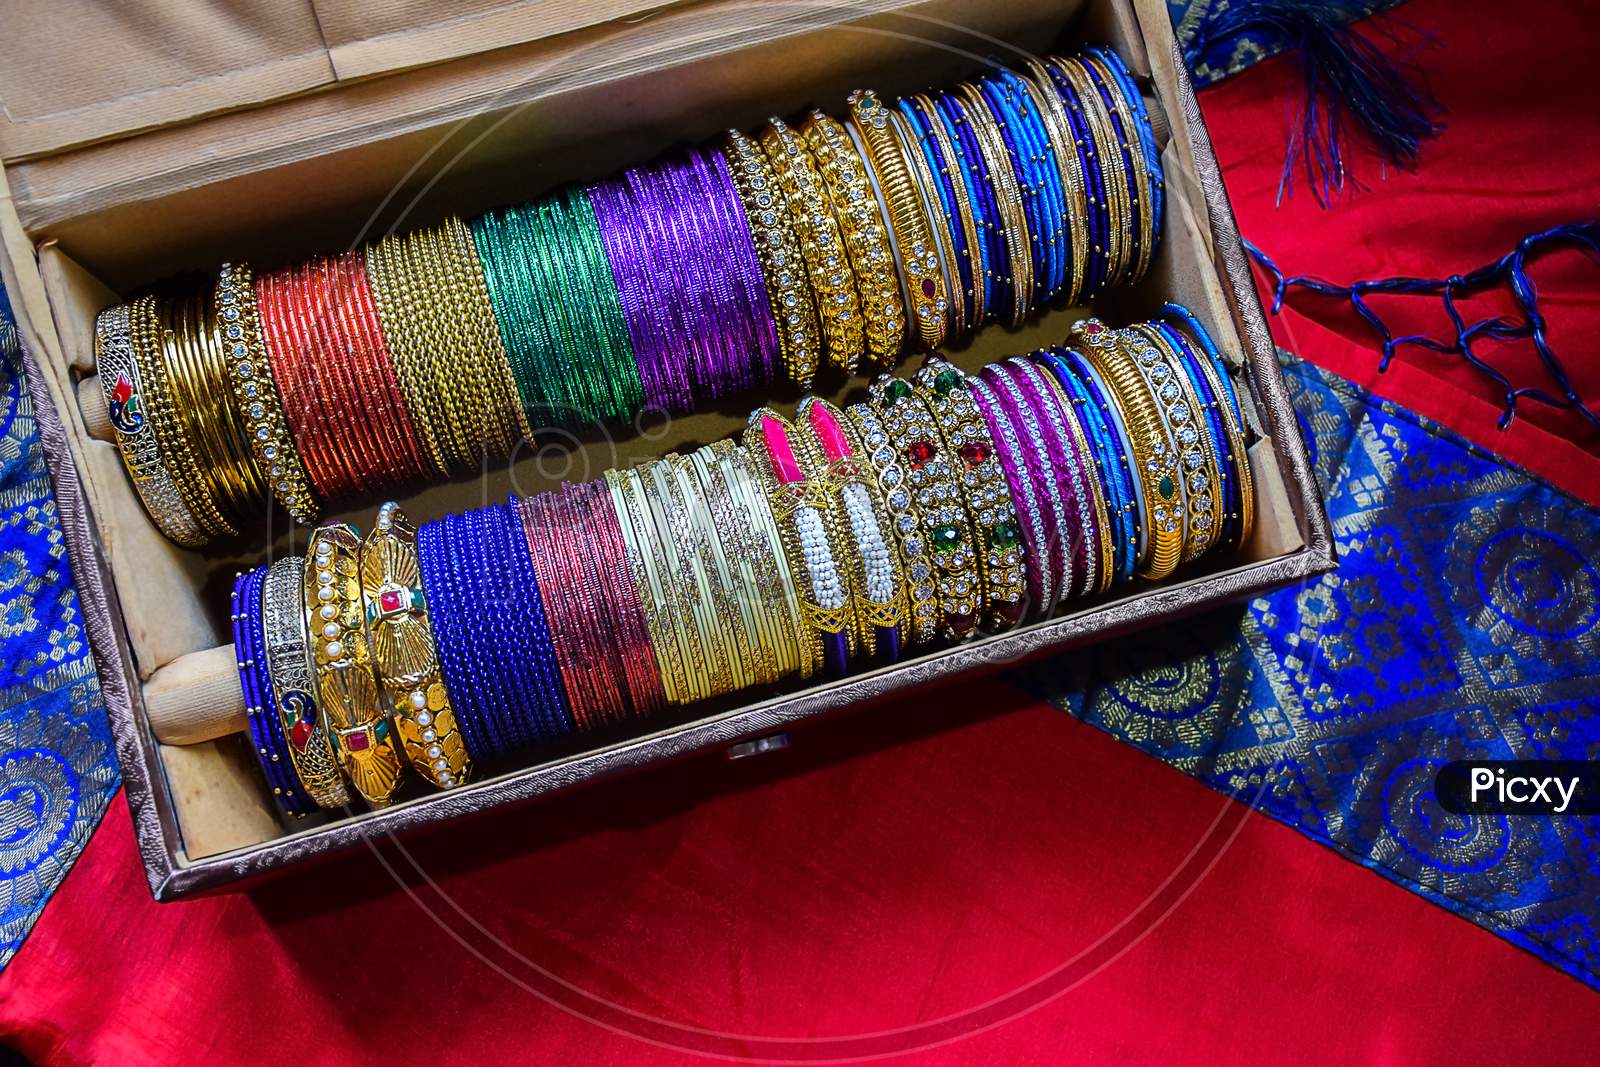 Stock Photo Of Indian Traditional Colorful Bangles And Bracelet Kept And Decorated In Bangle Box On Red Background, Focus On Object At Bangalore Karnataka India.